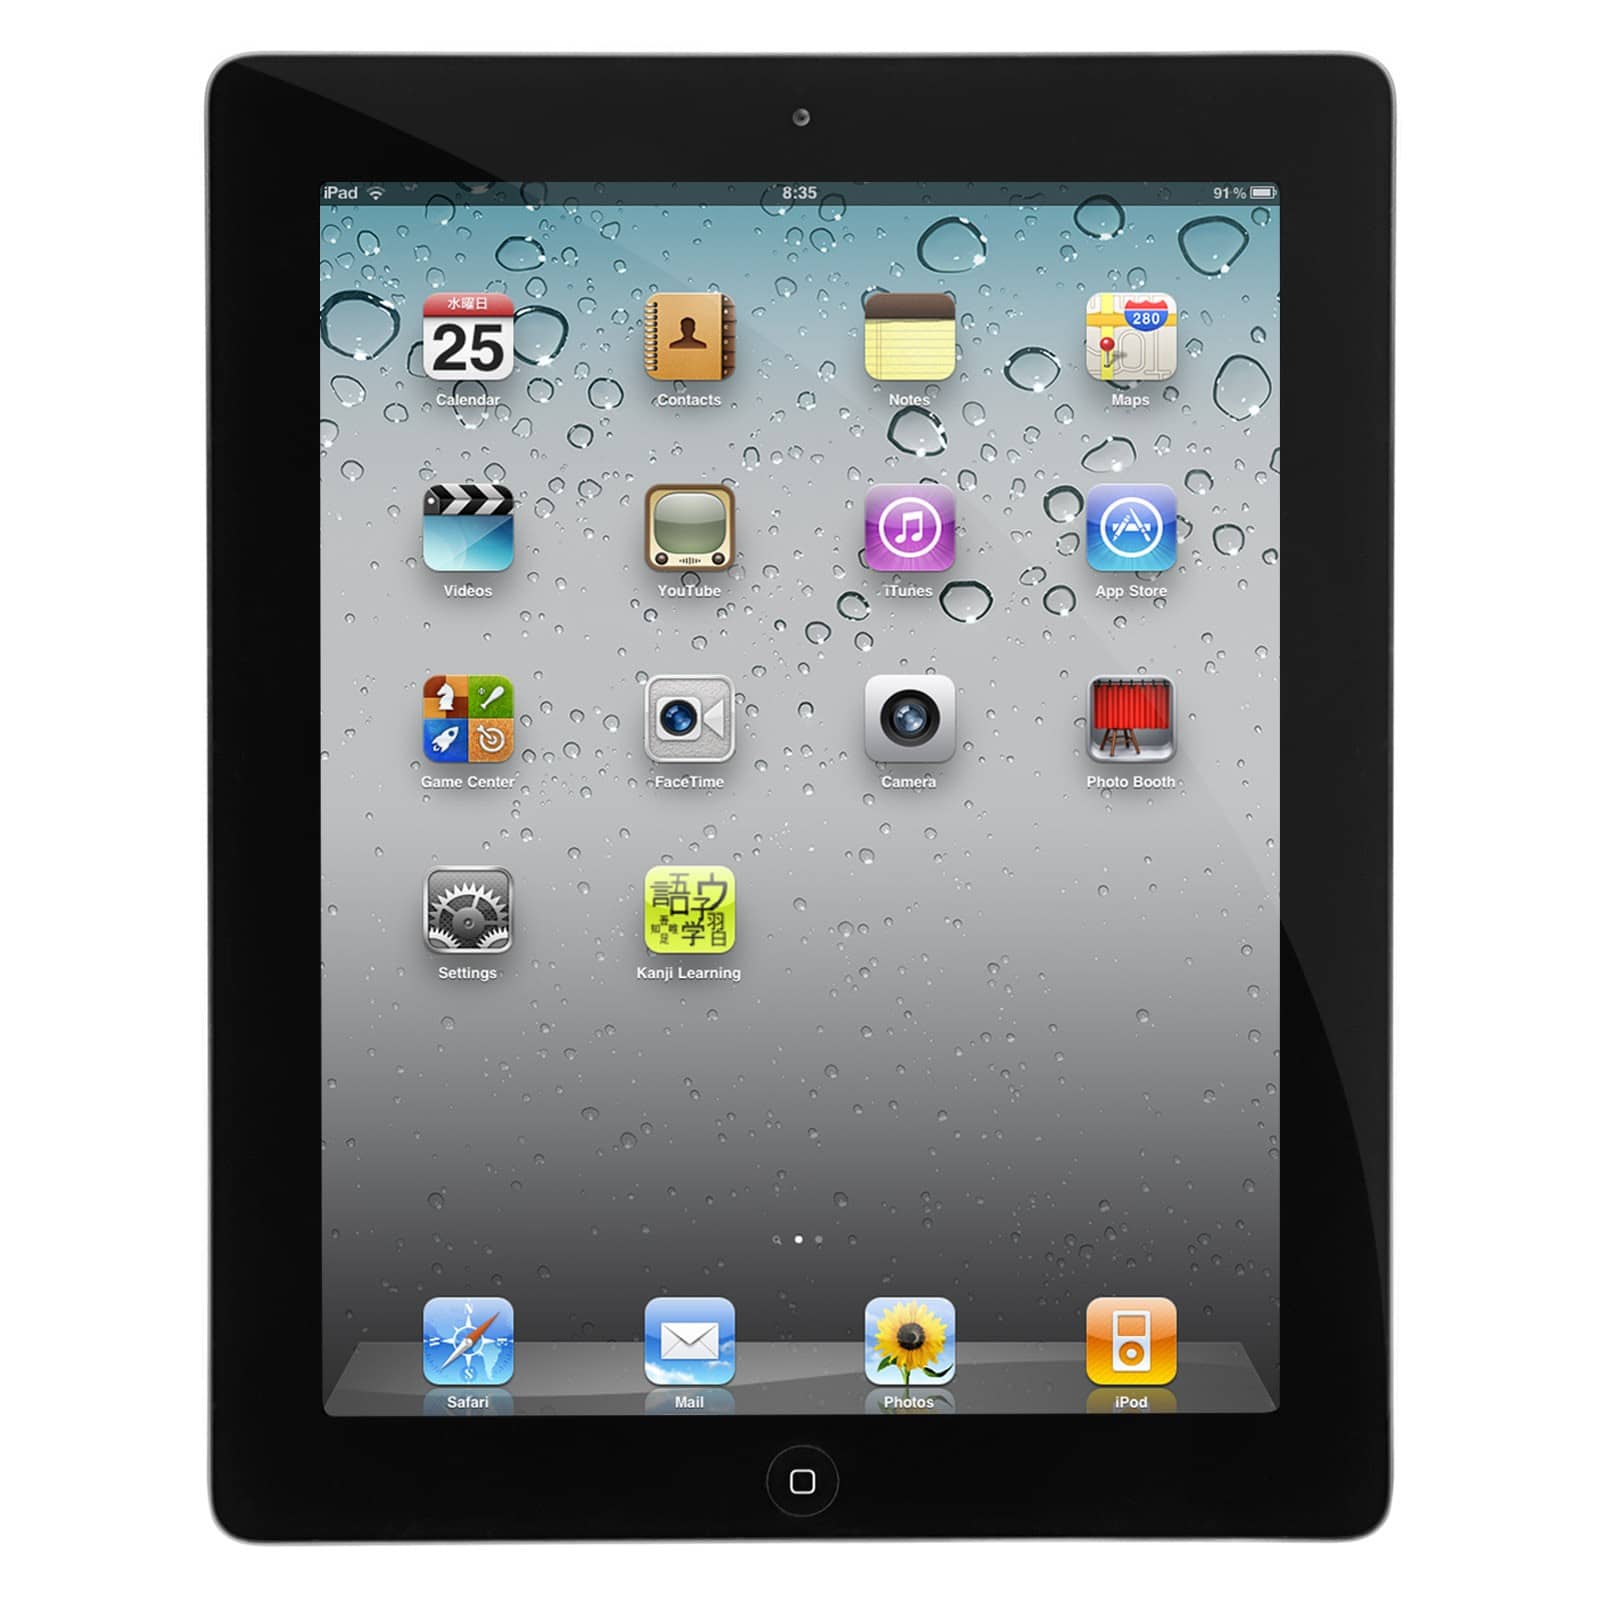 Apple iPad 2 WiFi Technical Specifications